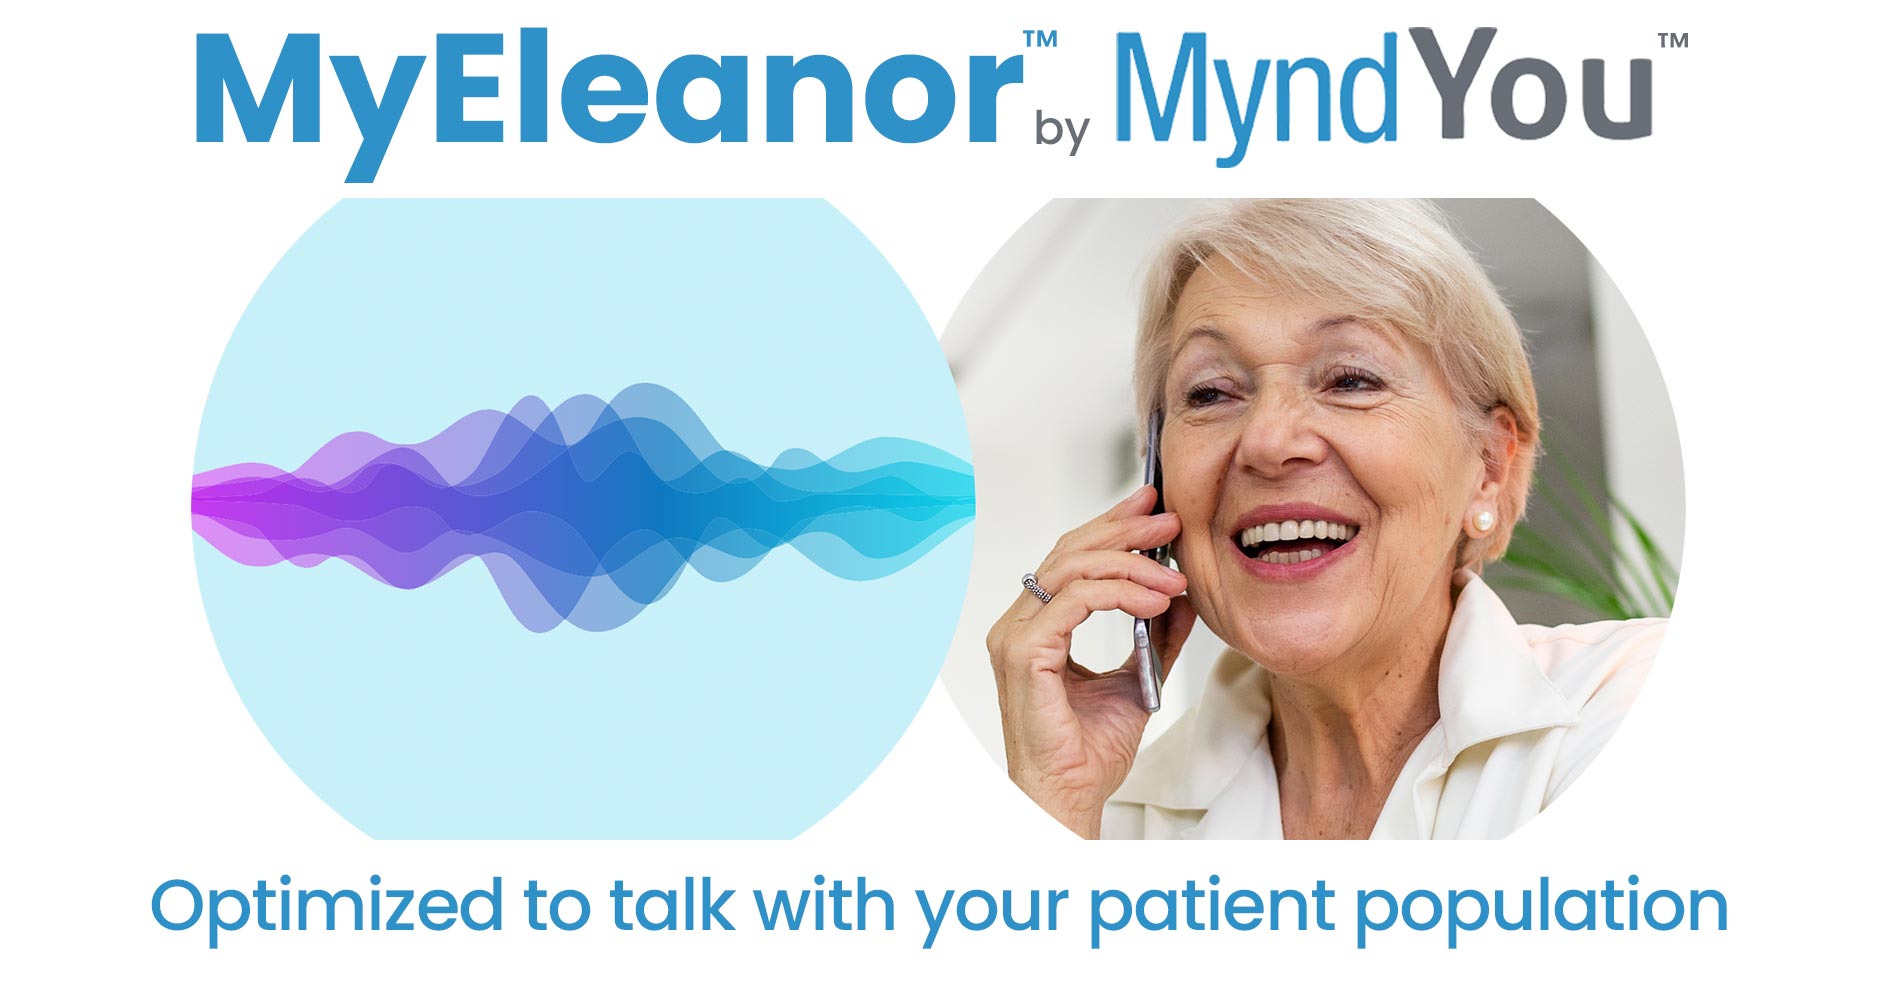 MyEleanor is optimized to talk with your patient population.